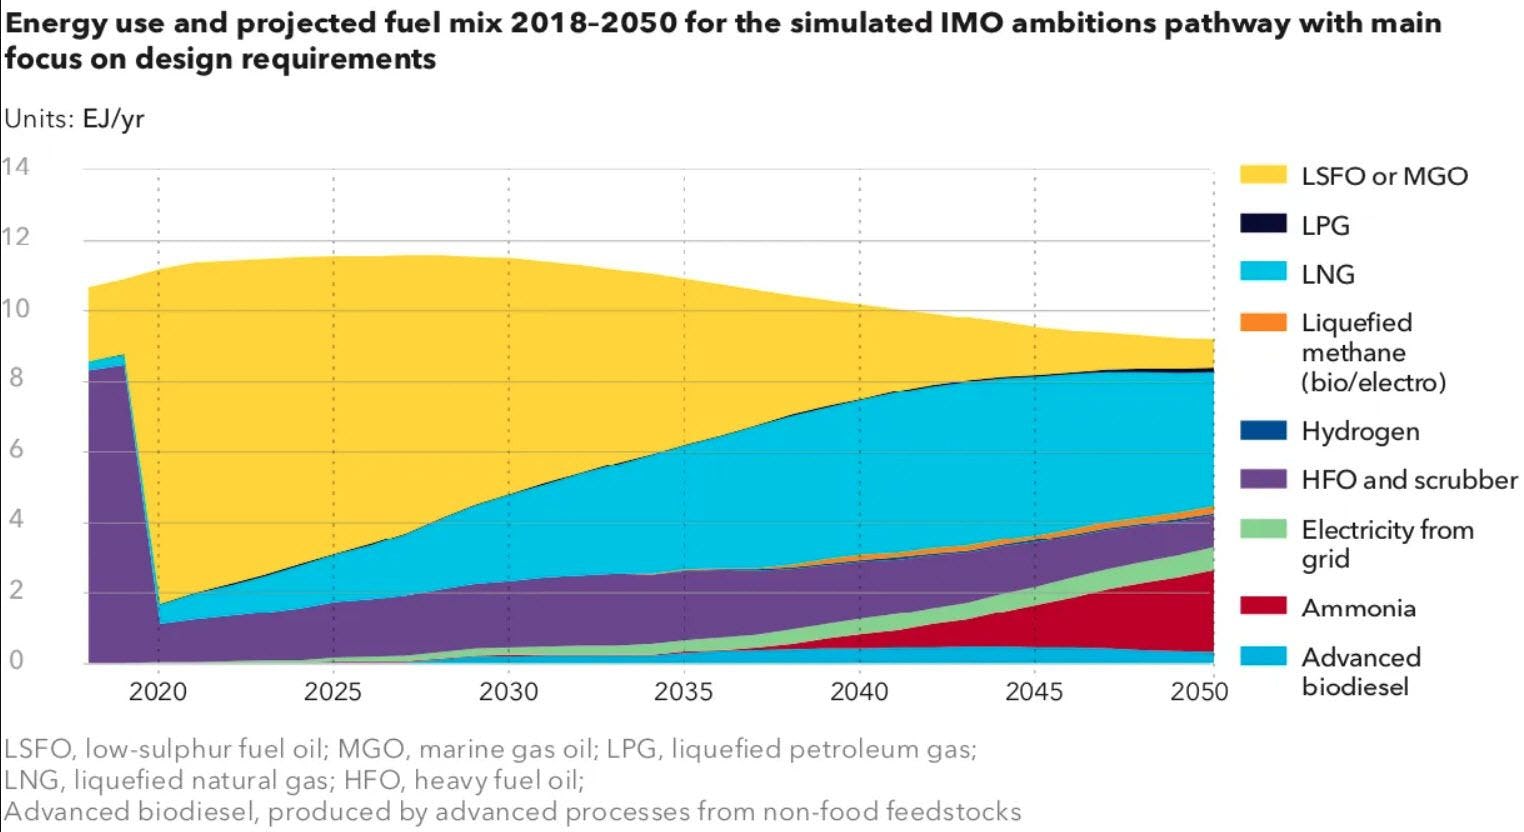 A graph illustrating project energy use and fuel mix 